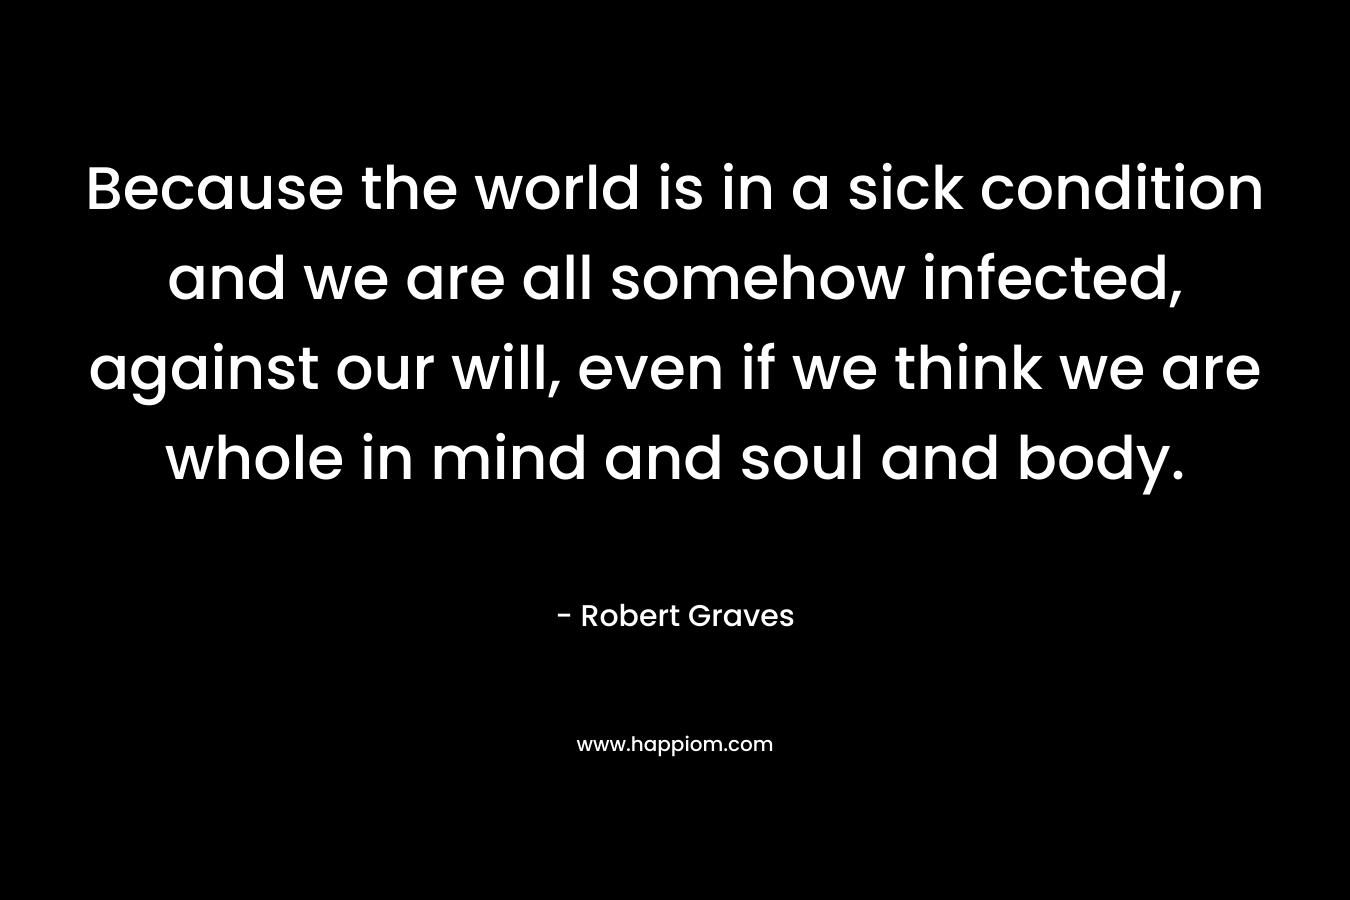 Because the world is in a sick condition and we are all somehow infected, against our will, even if we think we are whole in mind and soul and body. – Robert Graves